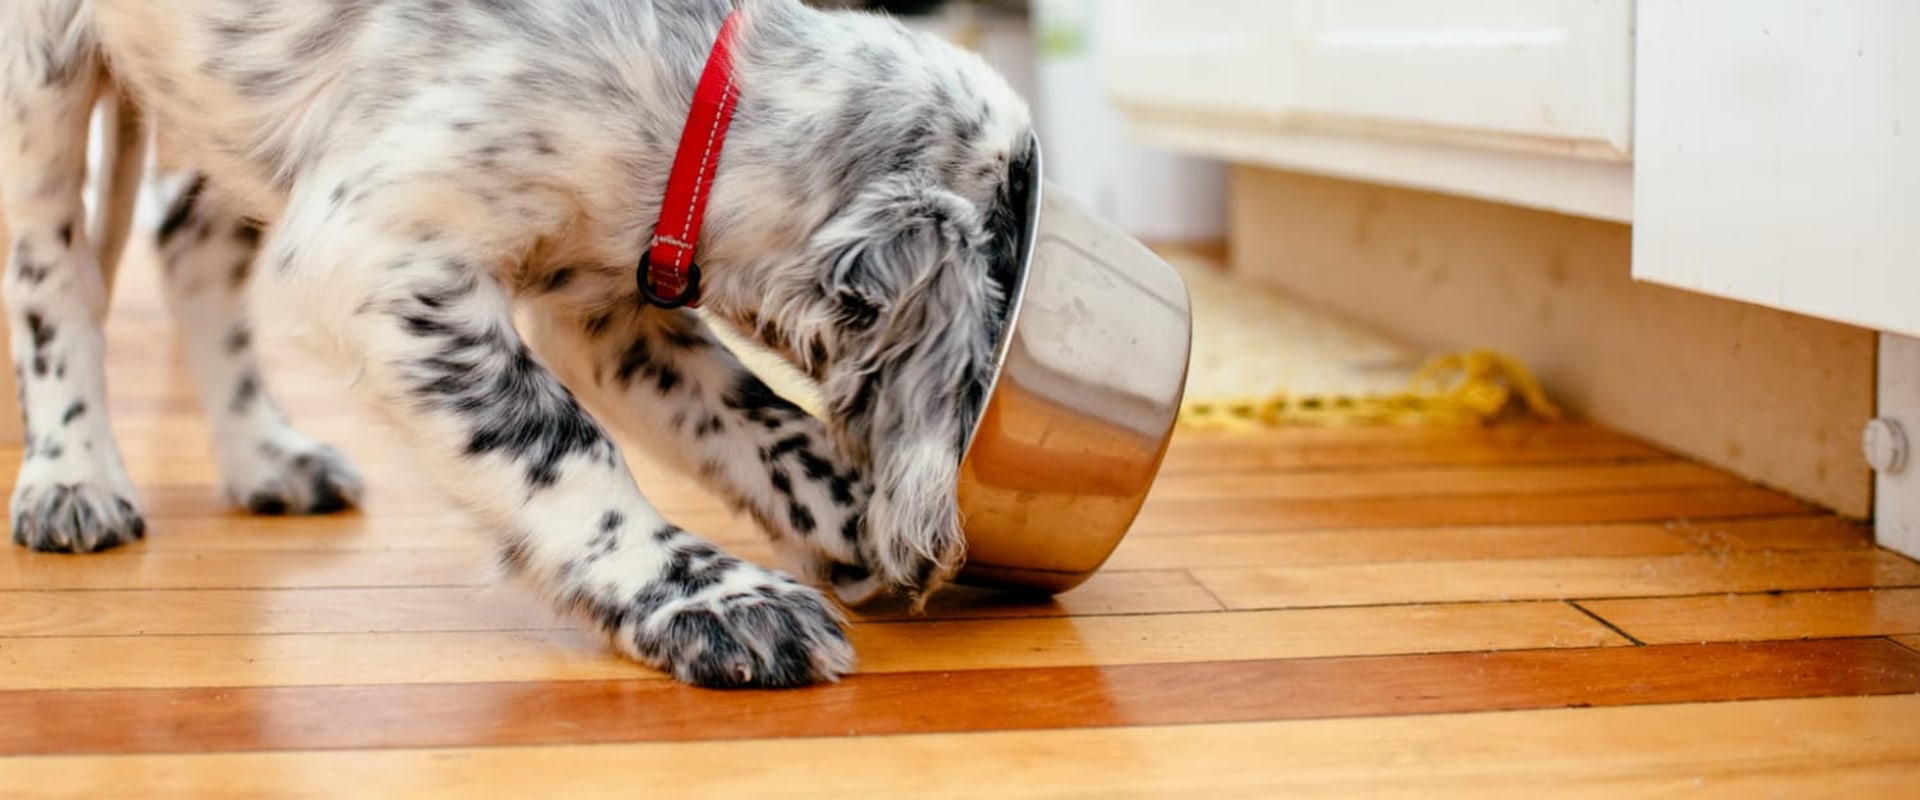 What is the tastiest dog food for picky eaters?